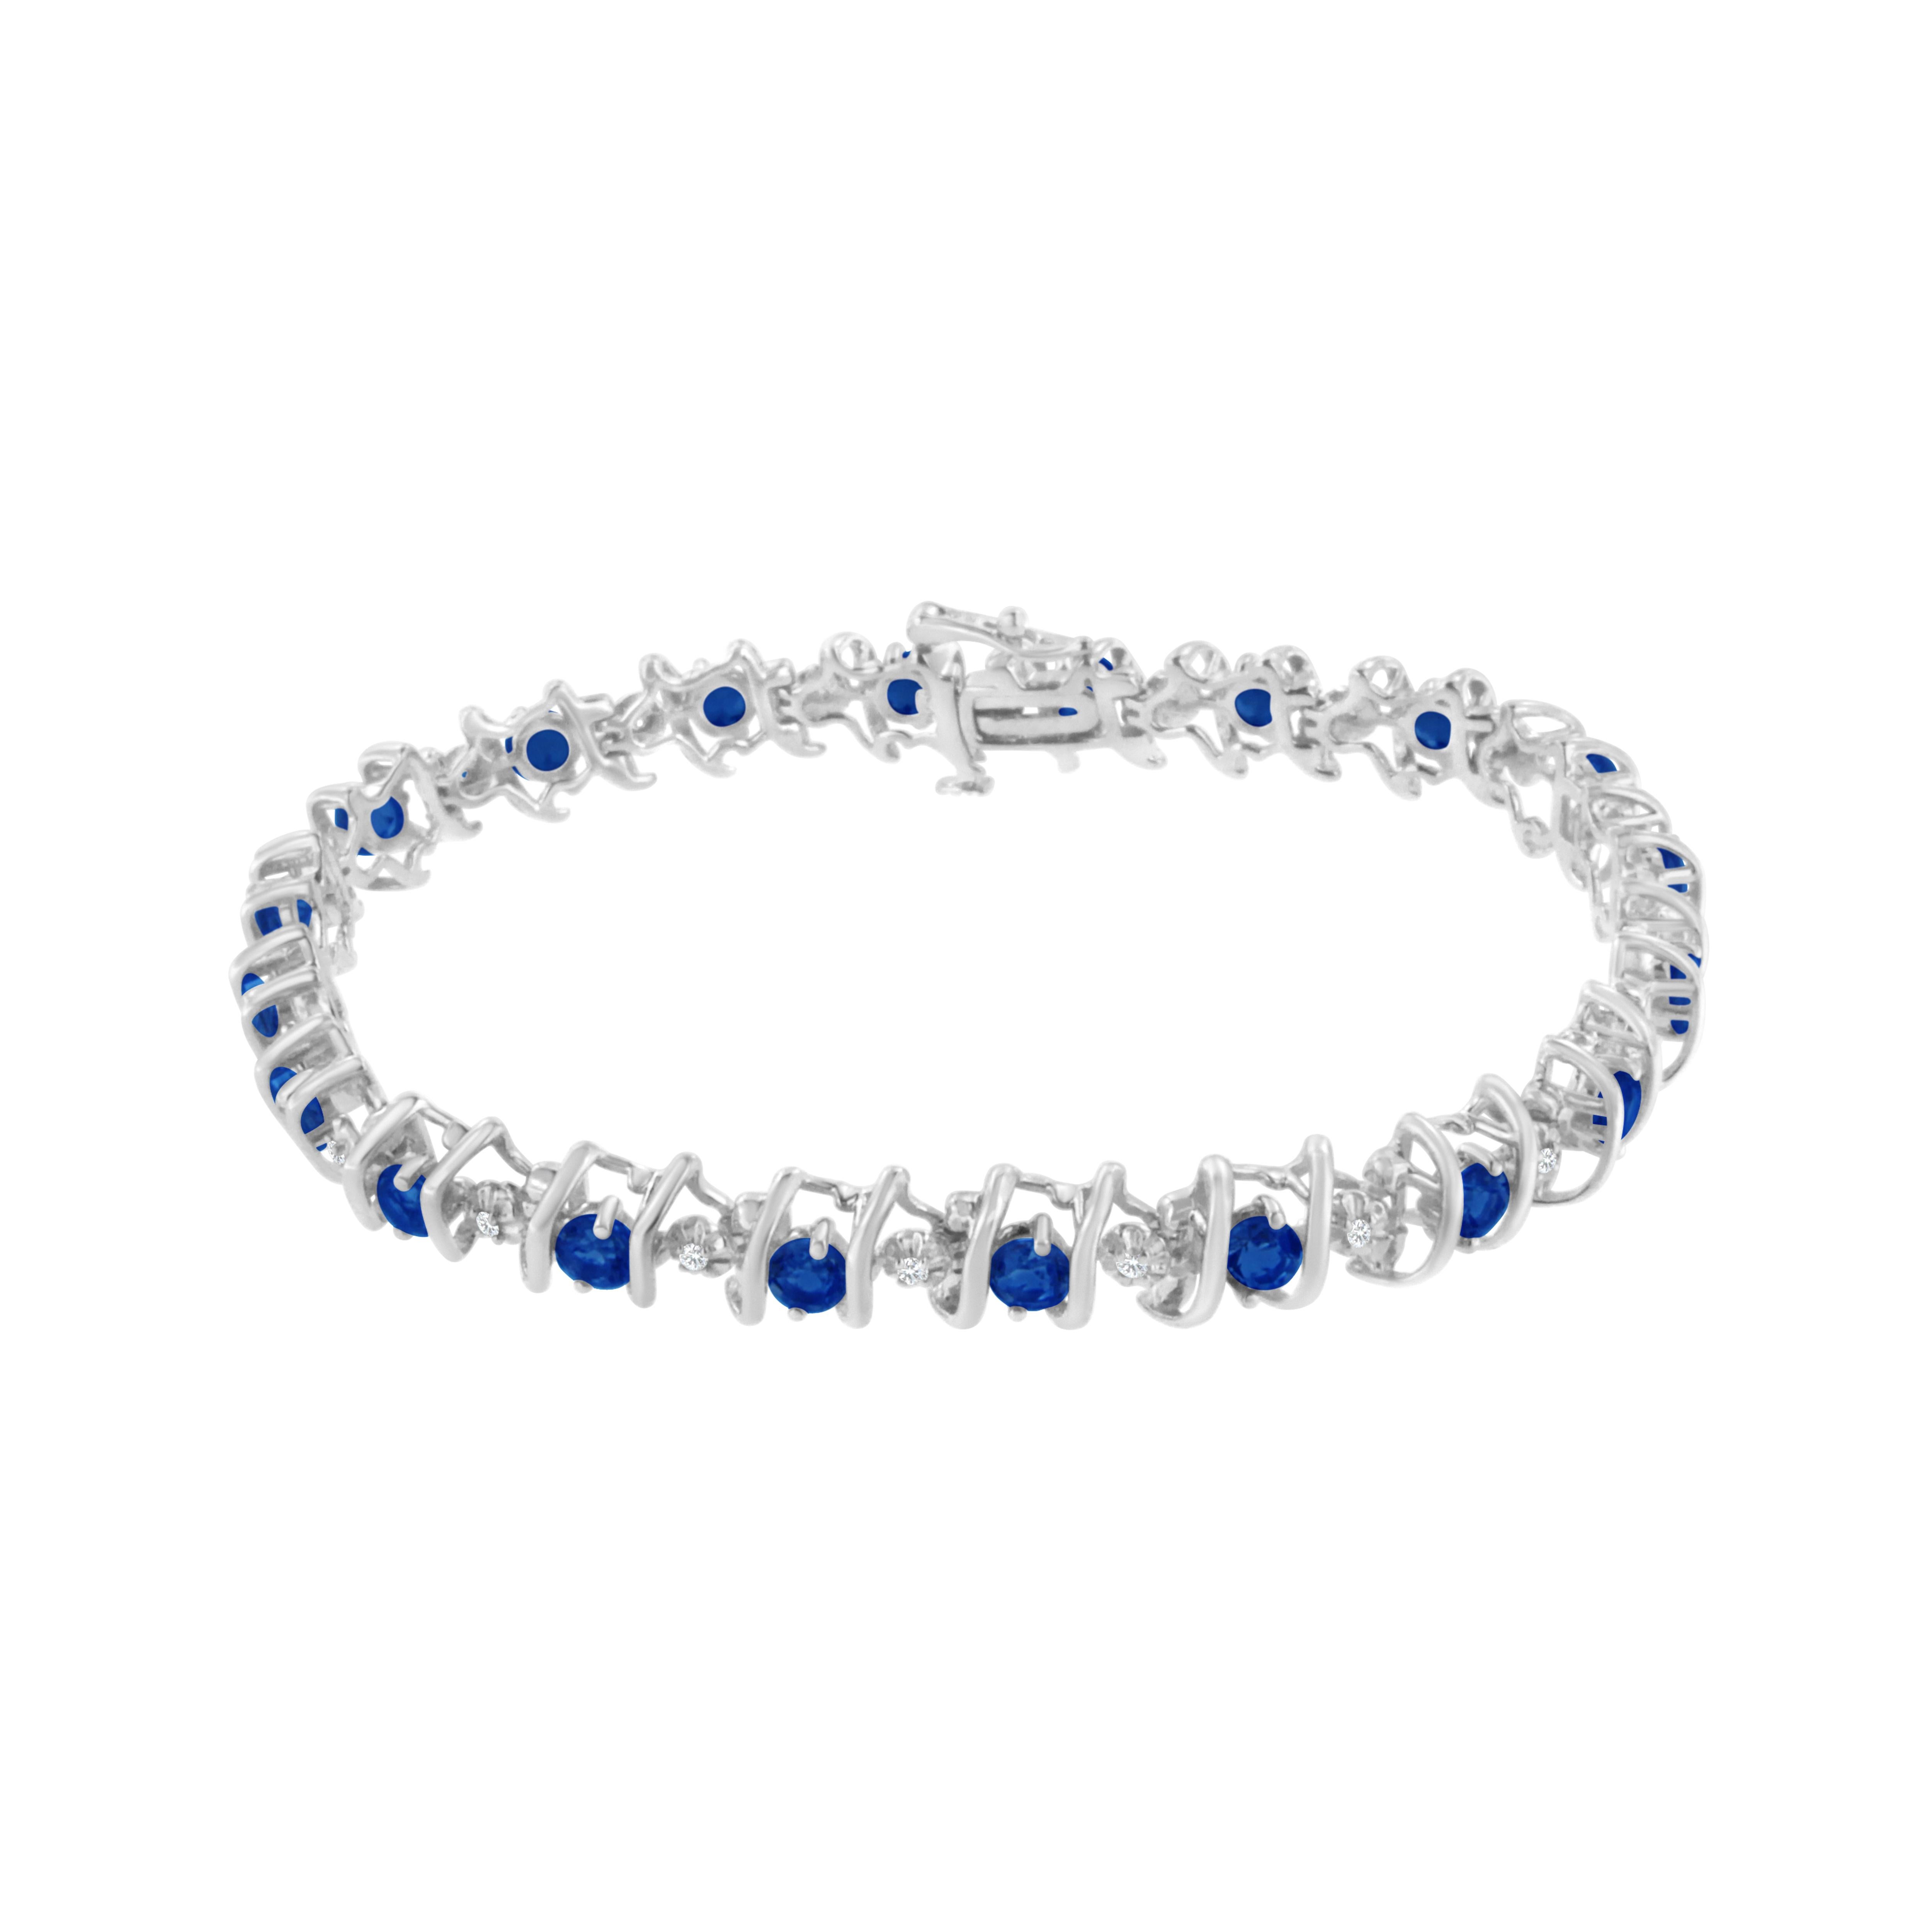 Blue sapphires and sparkling white diamonds are set in a S-link tennis bracelet crafted in cool sterling silver. The bracelet features 20 sparkling diamonds, which have a total weight of .15 carats. The 20 lab-created sapphires add brilliant color